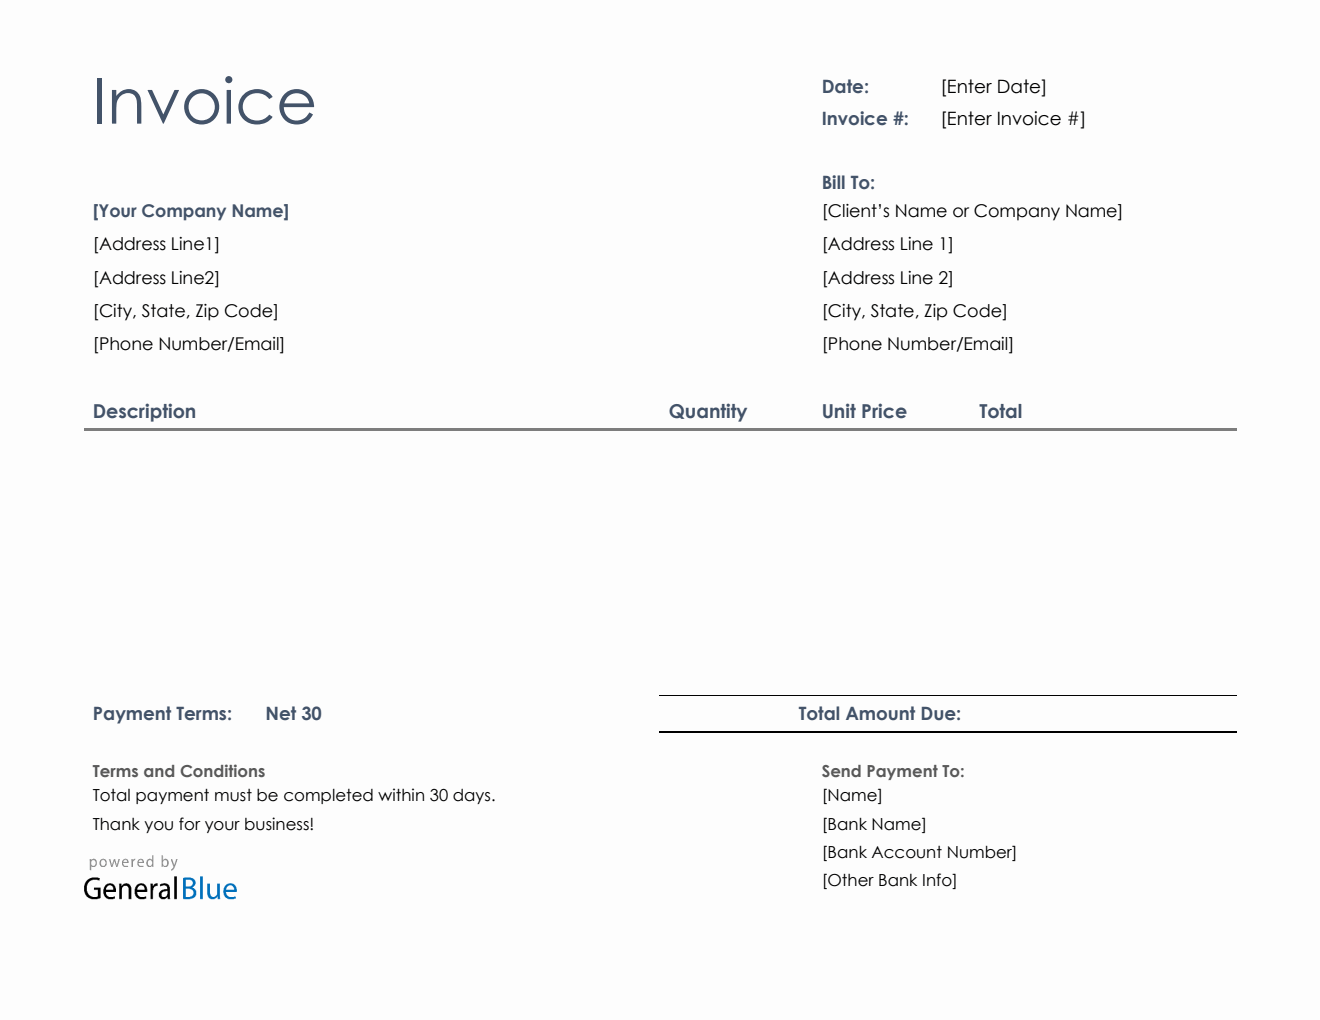 U.S. Invoice Template in Word (Basic)